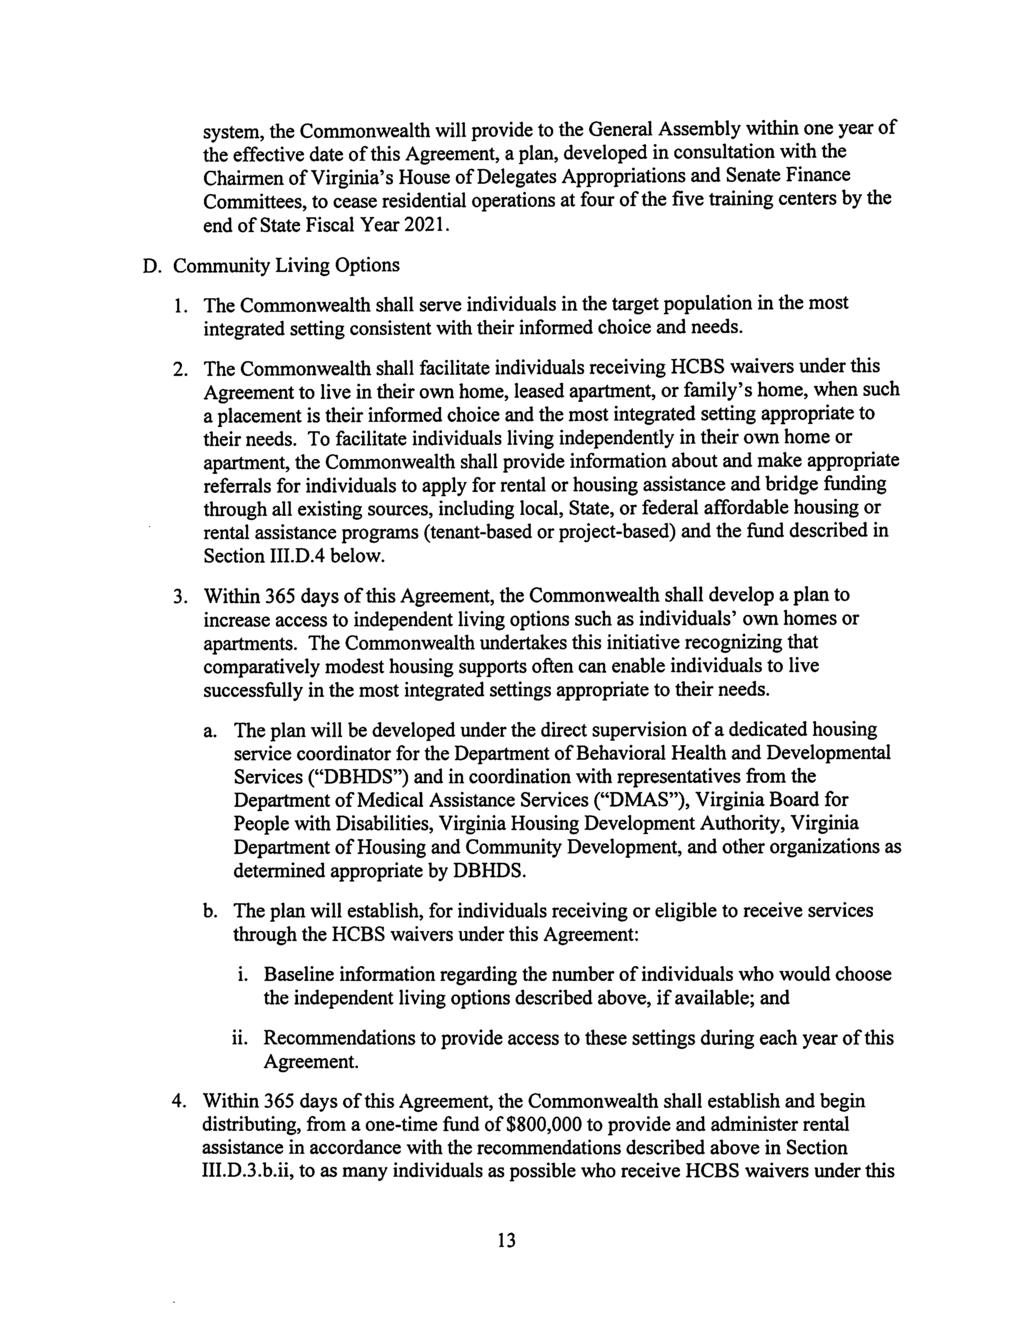 Case 3:12-cv-00059-JAG Document 112 Filed 08/23/12 Page 26 of 53 PageID# 4664 system, the Commonwealth will provide tothe General Assembly within one year of the effective date ofthis Agreement, a